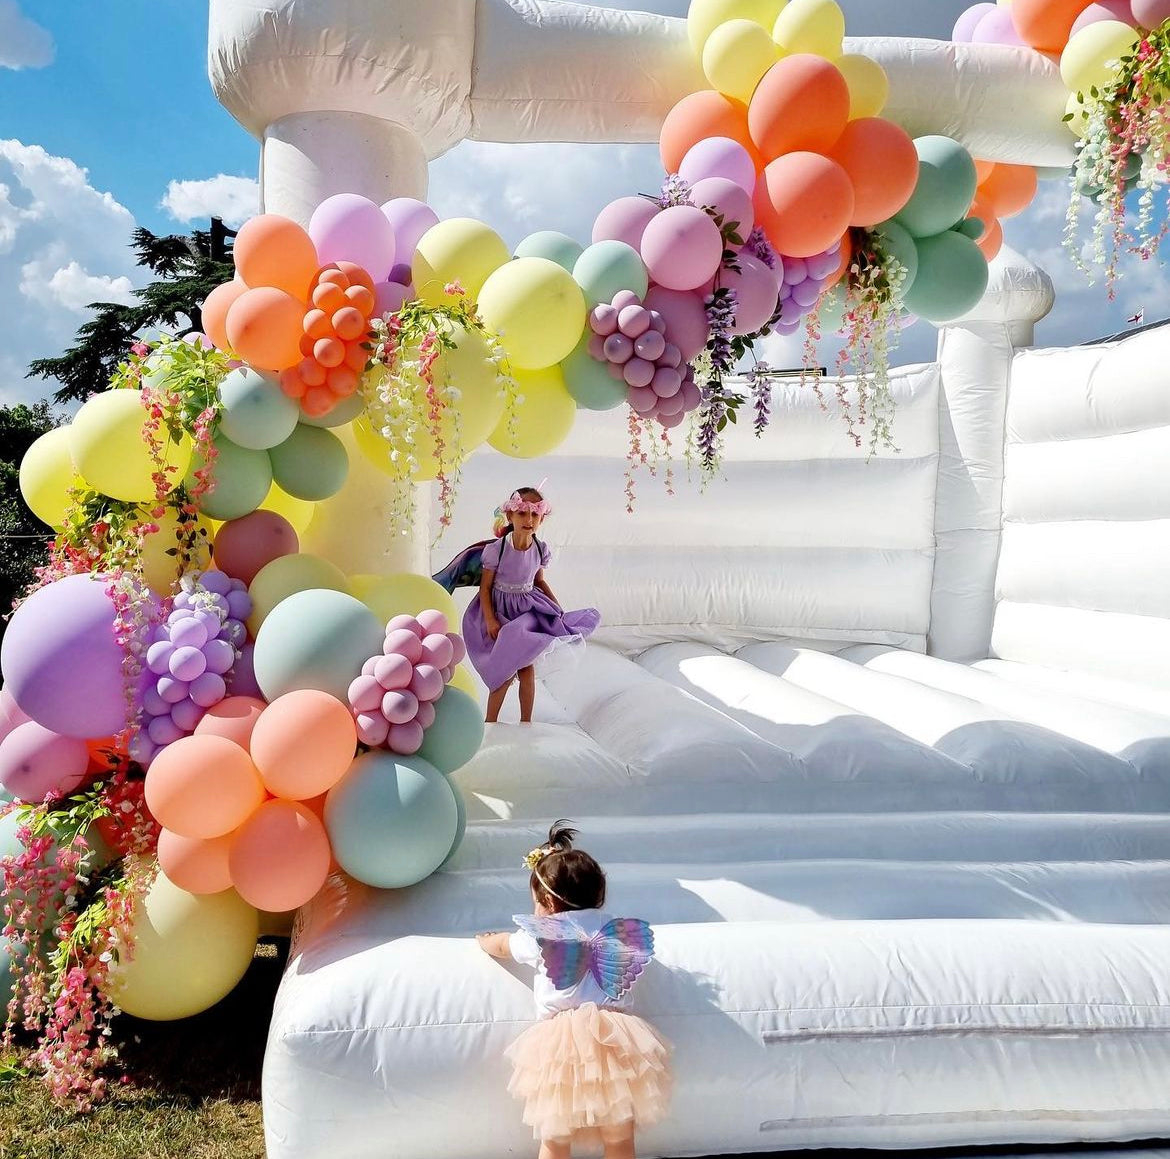 Couture ballons luxueux